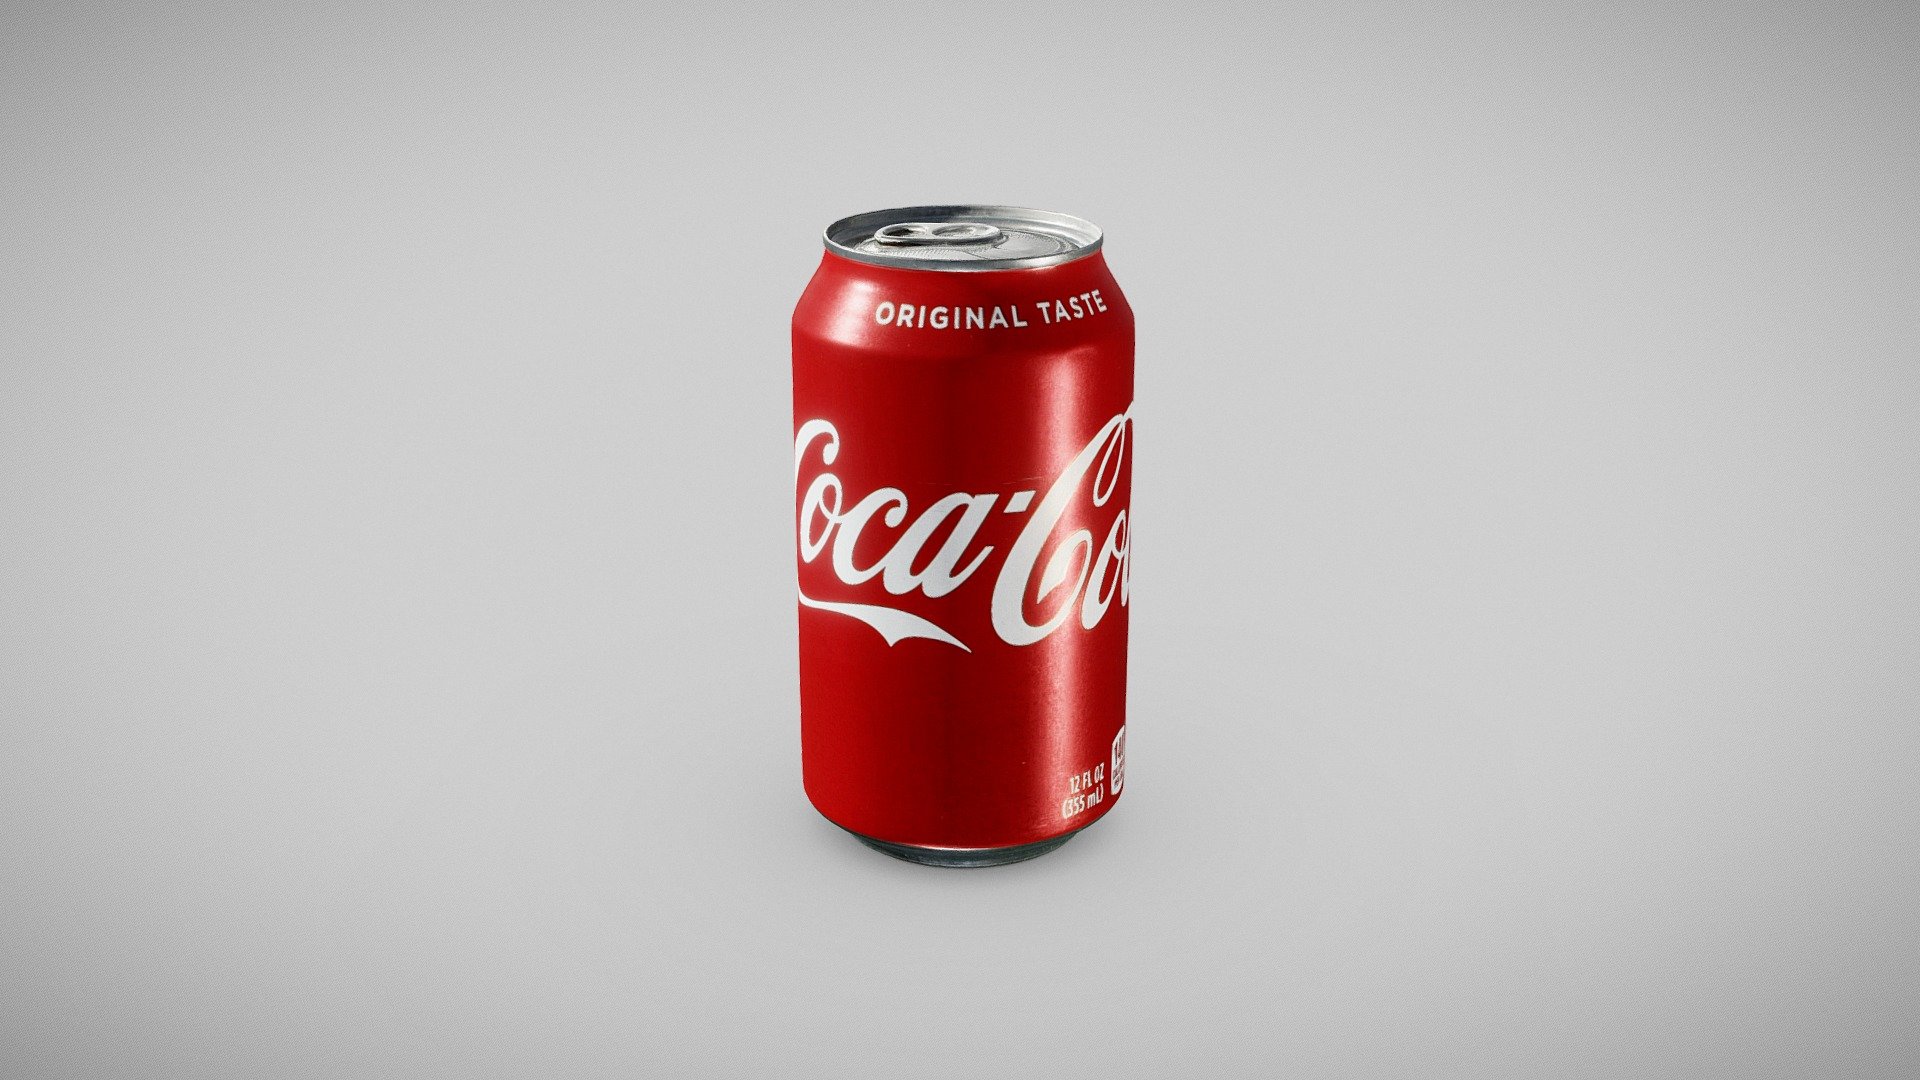 ** A Can of Coke **

Original Coca-Cola 355mL Can.

6.6 x 6.6 x 12.2 cm (108 micrometers per texel @ 2k)

Scanned using advanced technology developed by inciprocal Inc. that enables highly photo-realistic reproduction of real-world products in virtual environments. Our hardware and software technology combines advanced photometry, structured light, photogrammtery and light fields to capture and generate accurate material representations from tens of thousands of images targeting real-time and offline path-traced PBR compatible renderers.

Zip file includes low-poly OBJ mesh (in meters) with a set of 2k PBR textures compressed with lossless JPEG (no chroma sub-sampling) 3d model